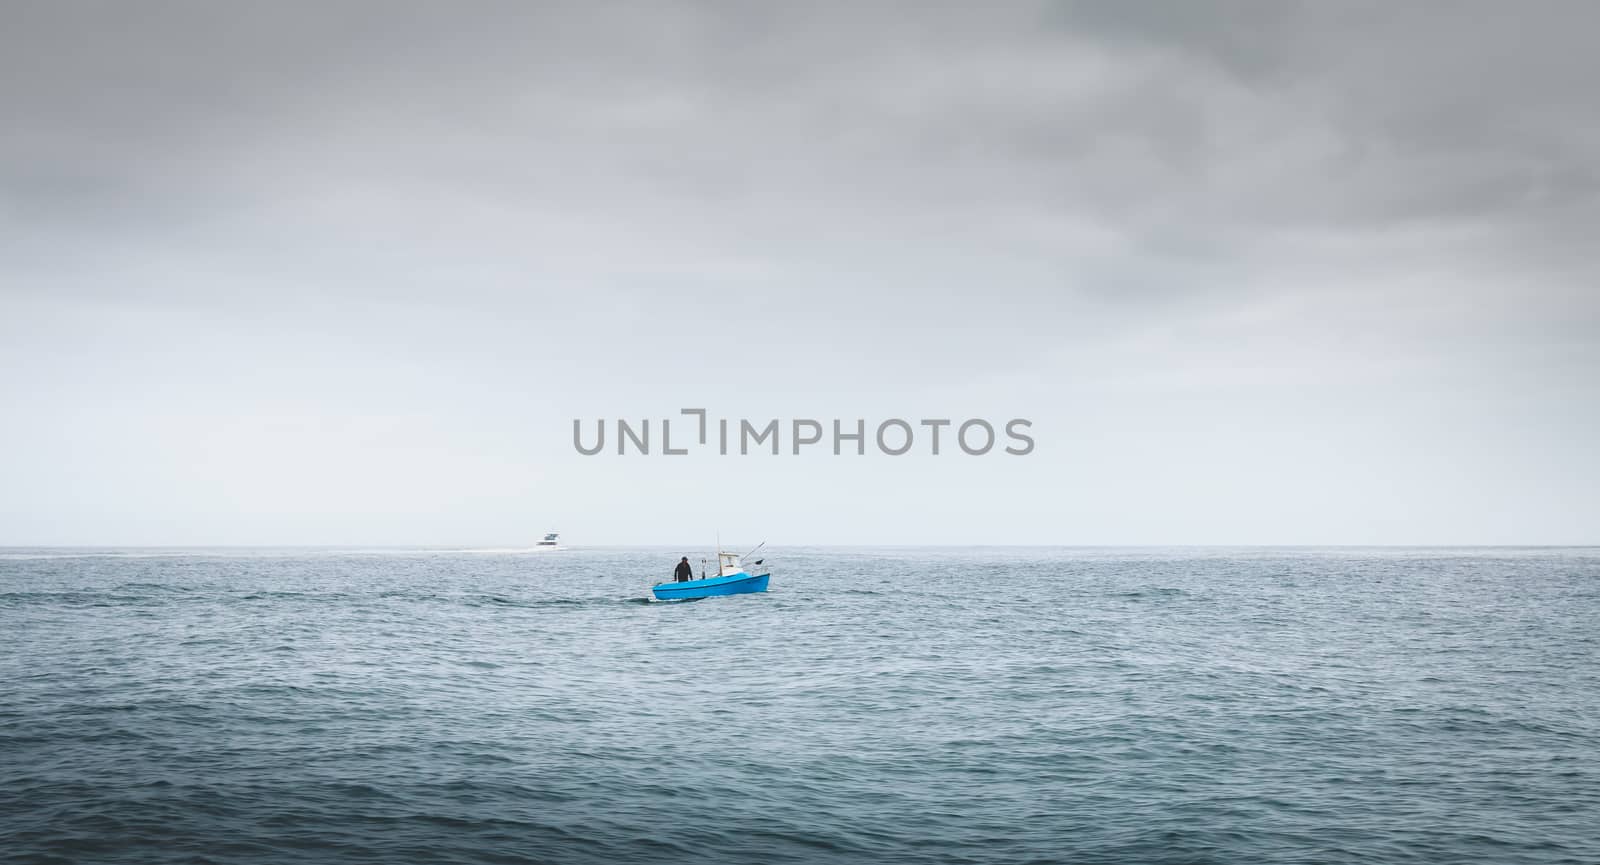 Port Joinville, France - September 18, 2018: Small blue fishing boat sailing on the coast near Port Joinville harbor on Yeu island on a summer day